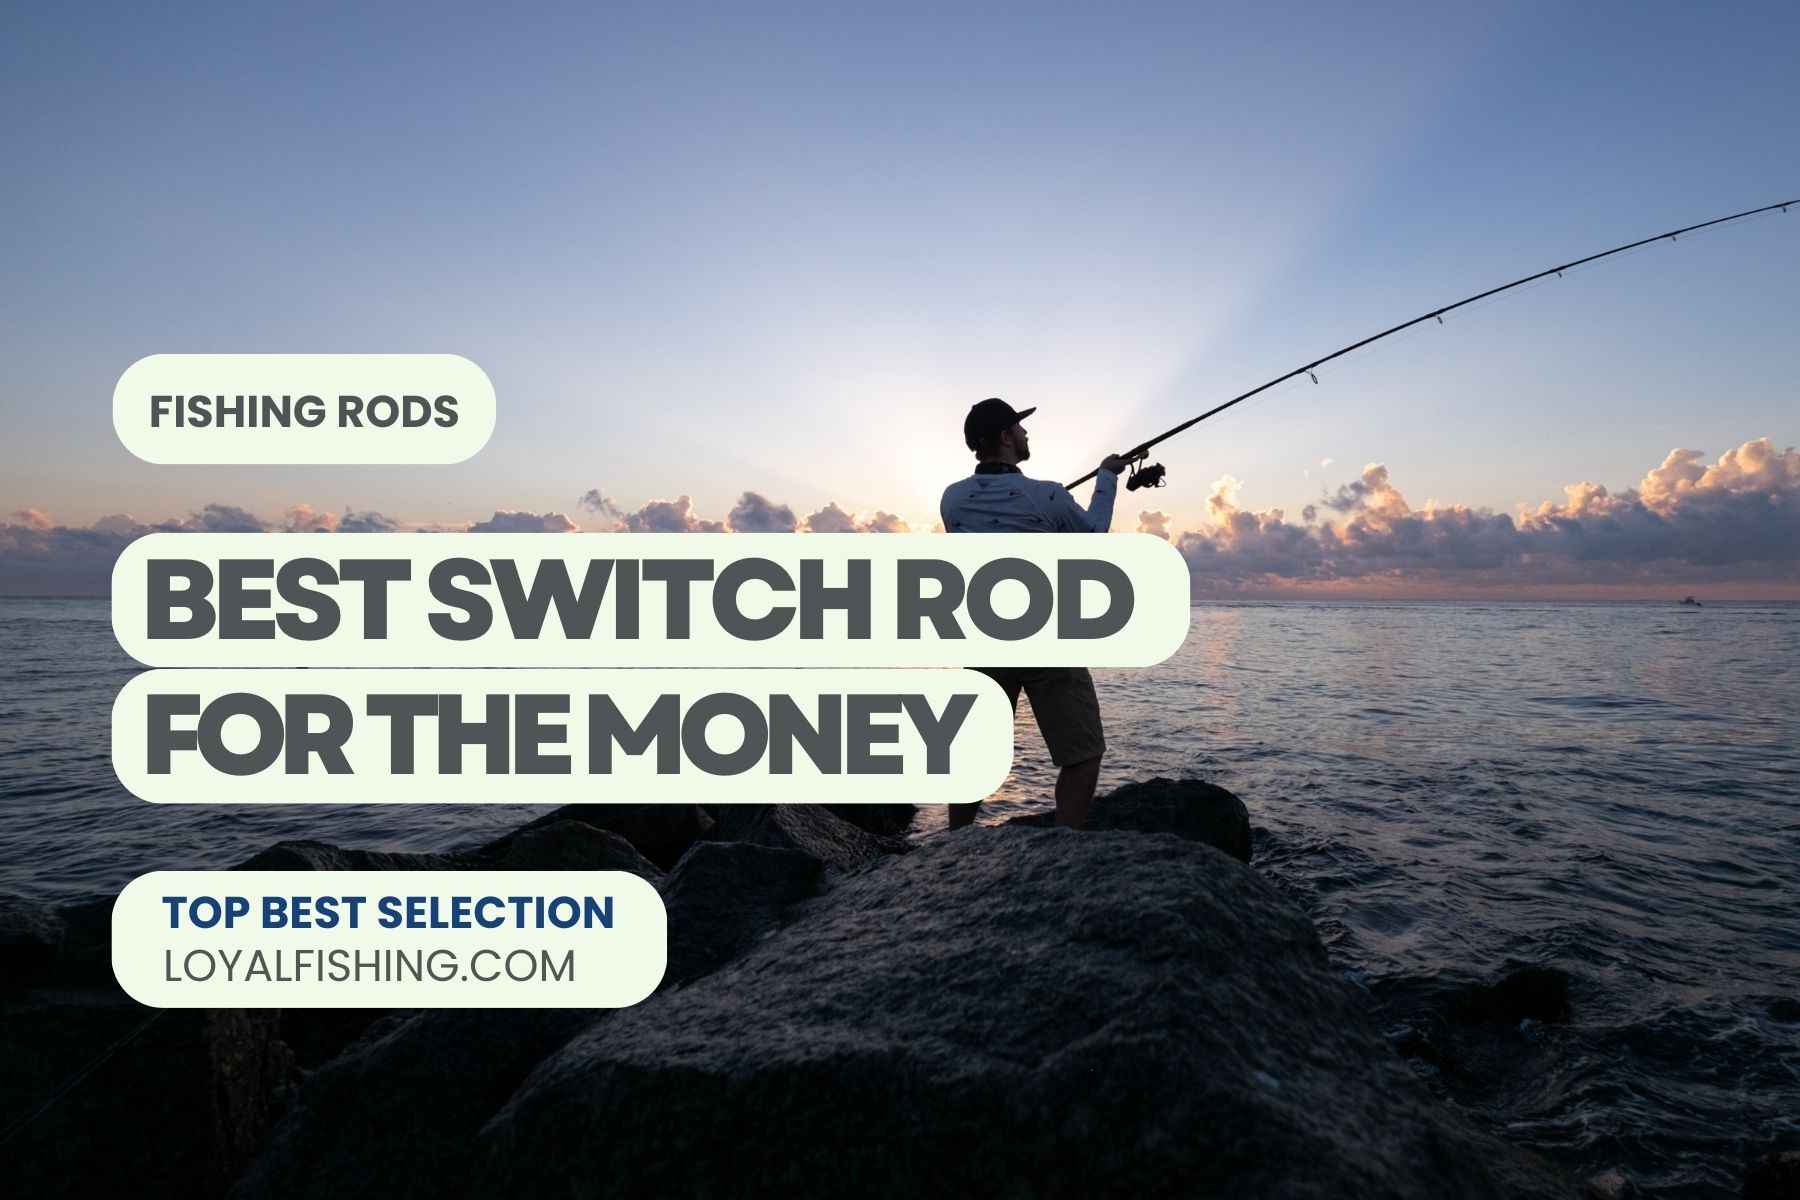 Best Switch Rod for the Money